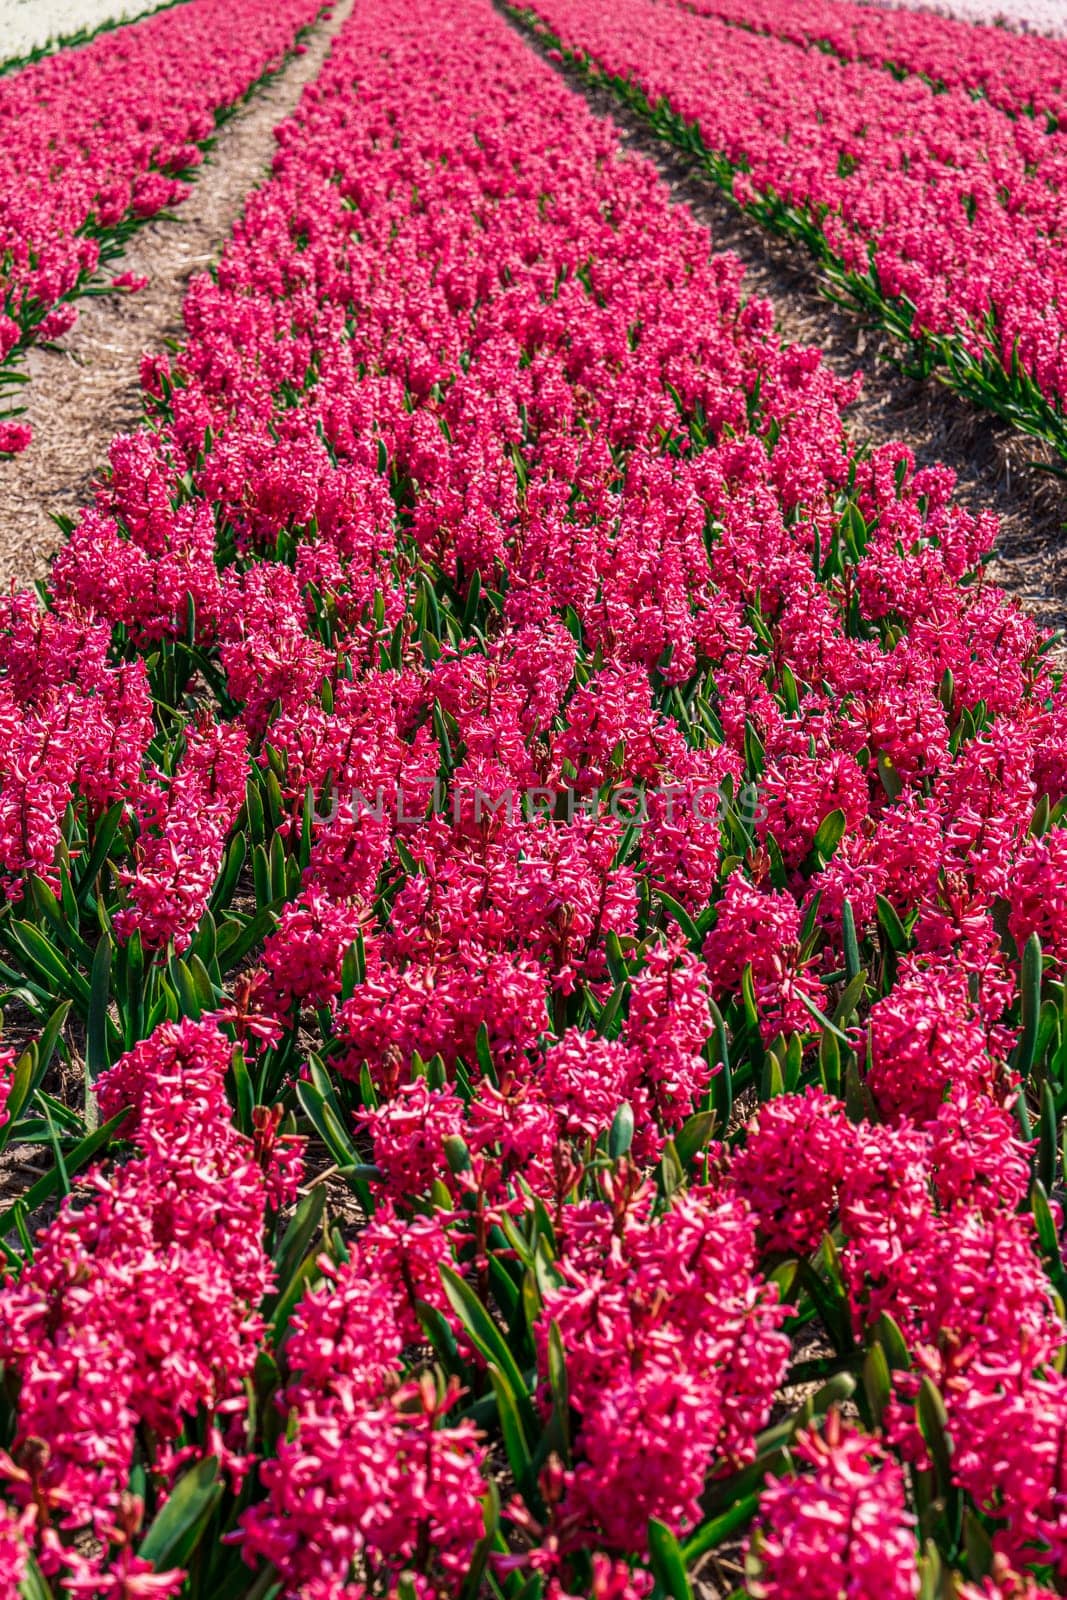 Huge Pink Aromatic Field of Blooming Hyacinths in Bright Day. Captivating Sights of Fragrance, Beauty by PhotoTime